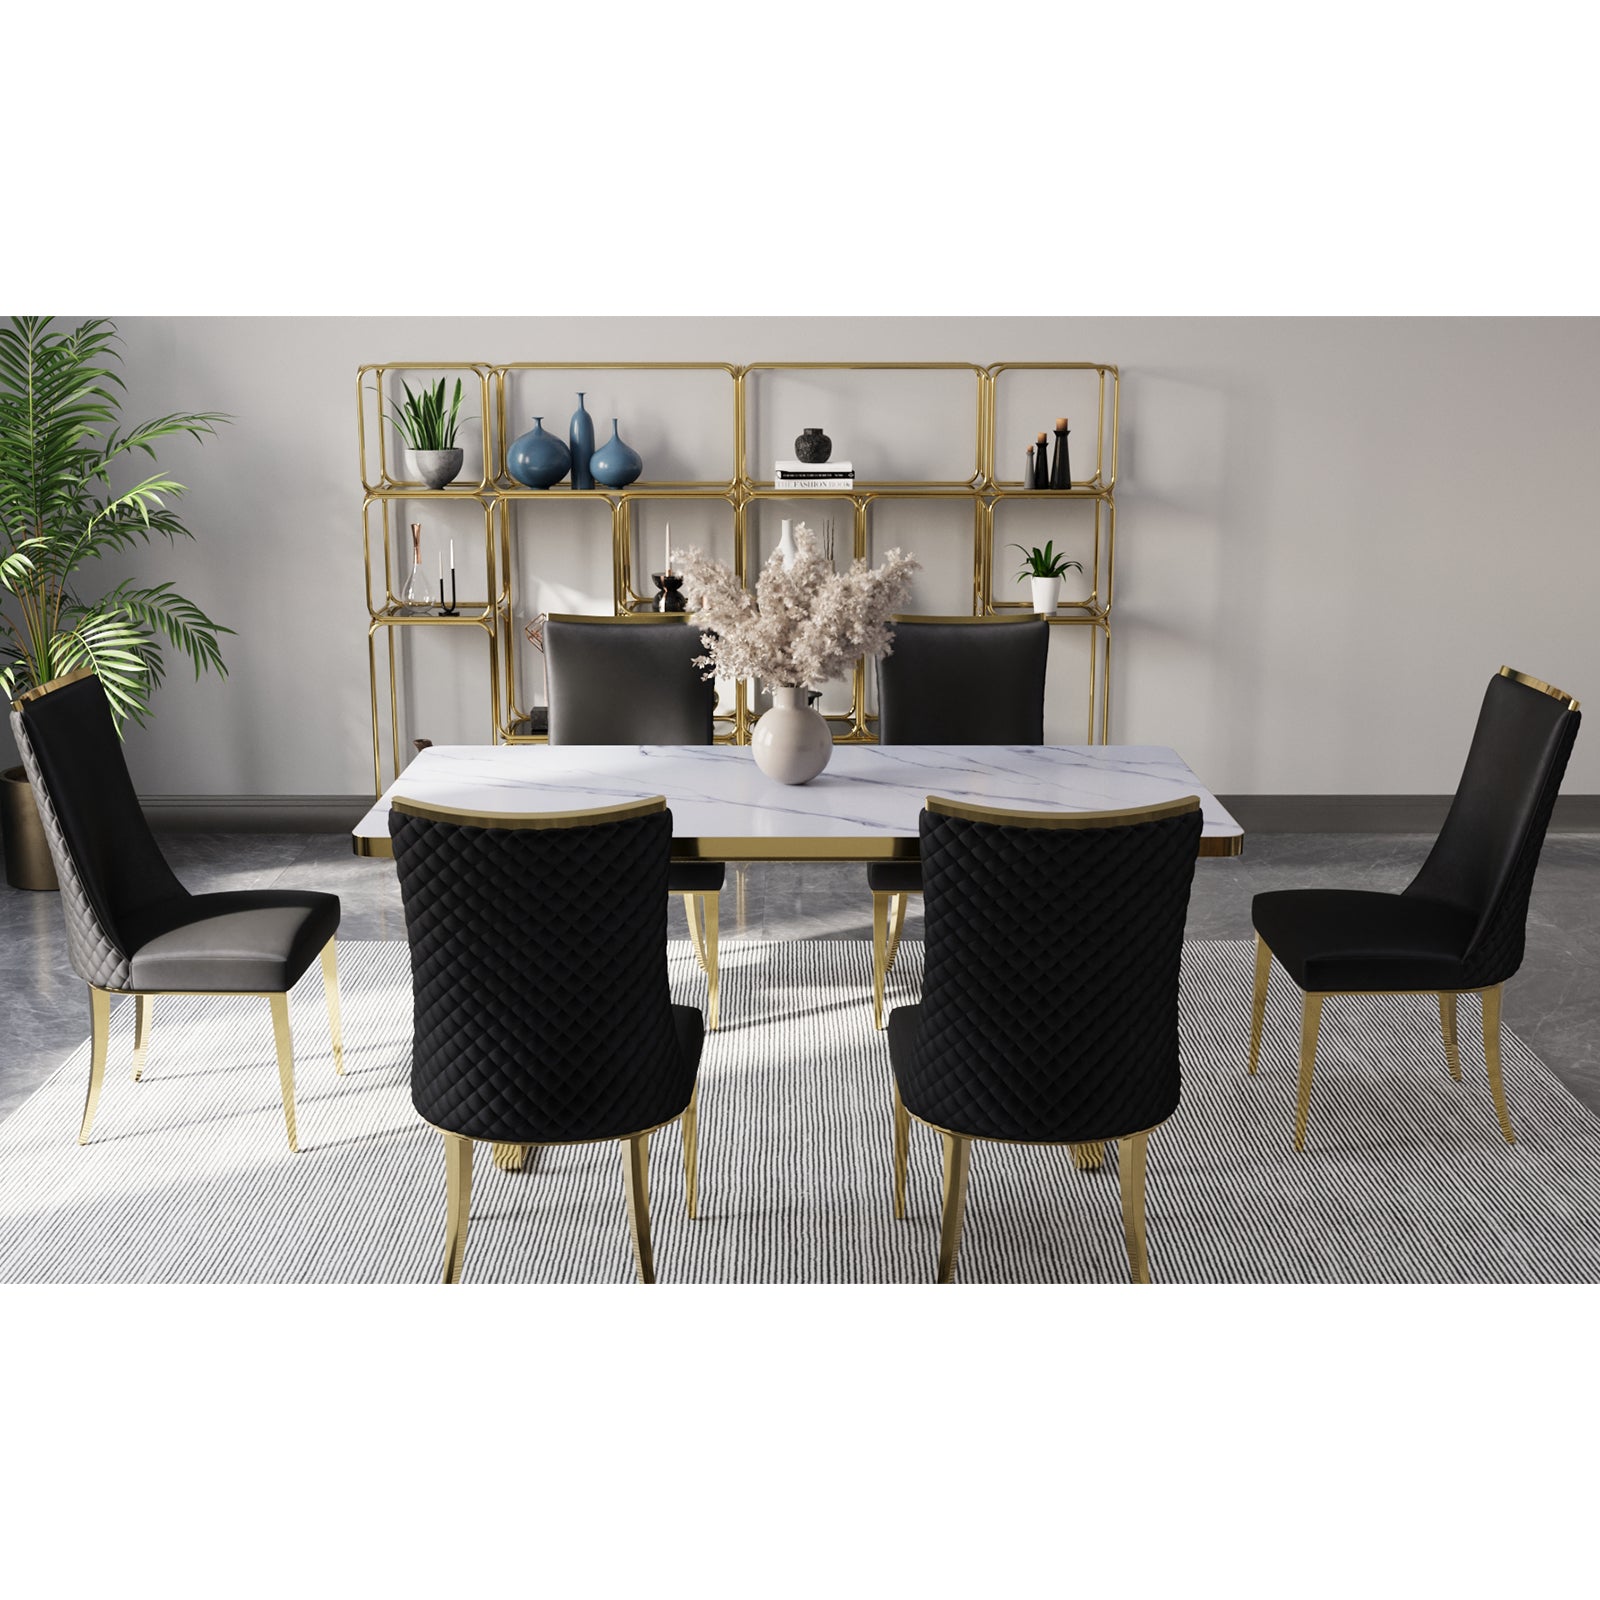 702 Set | AUZ White and Gold Dining room Sets for 6